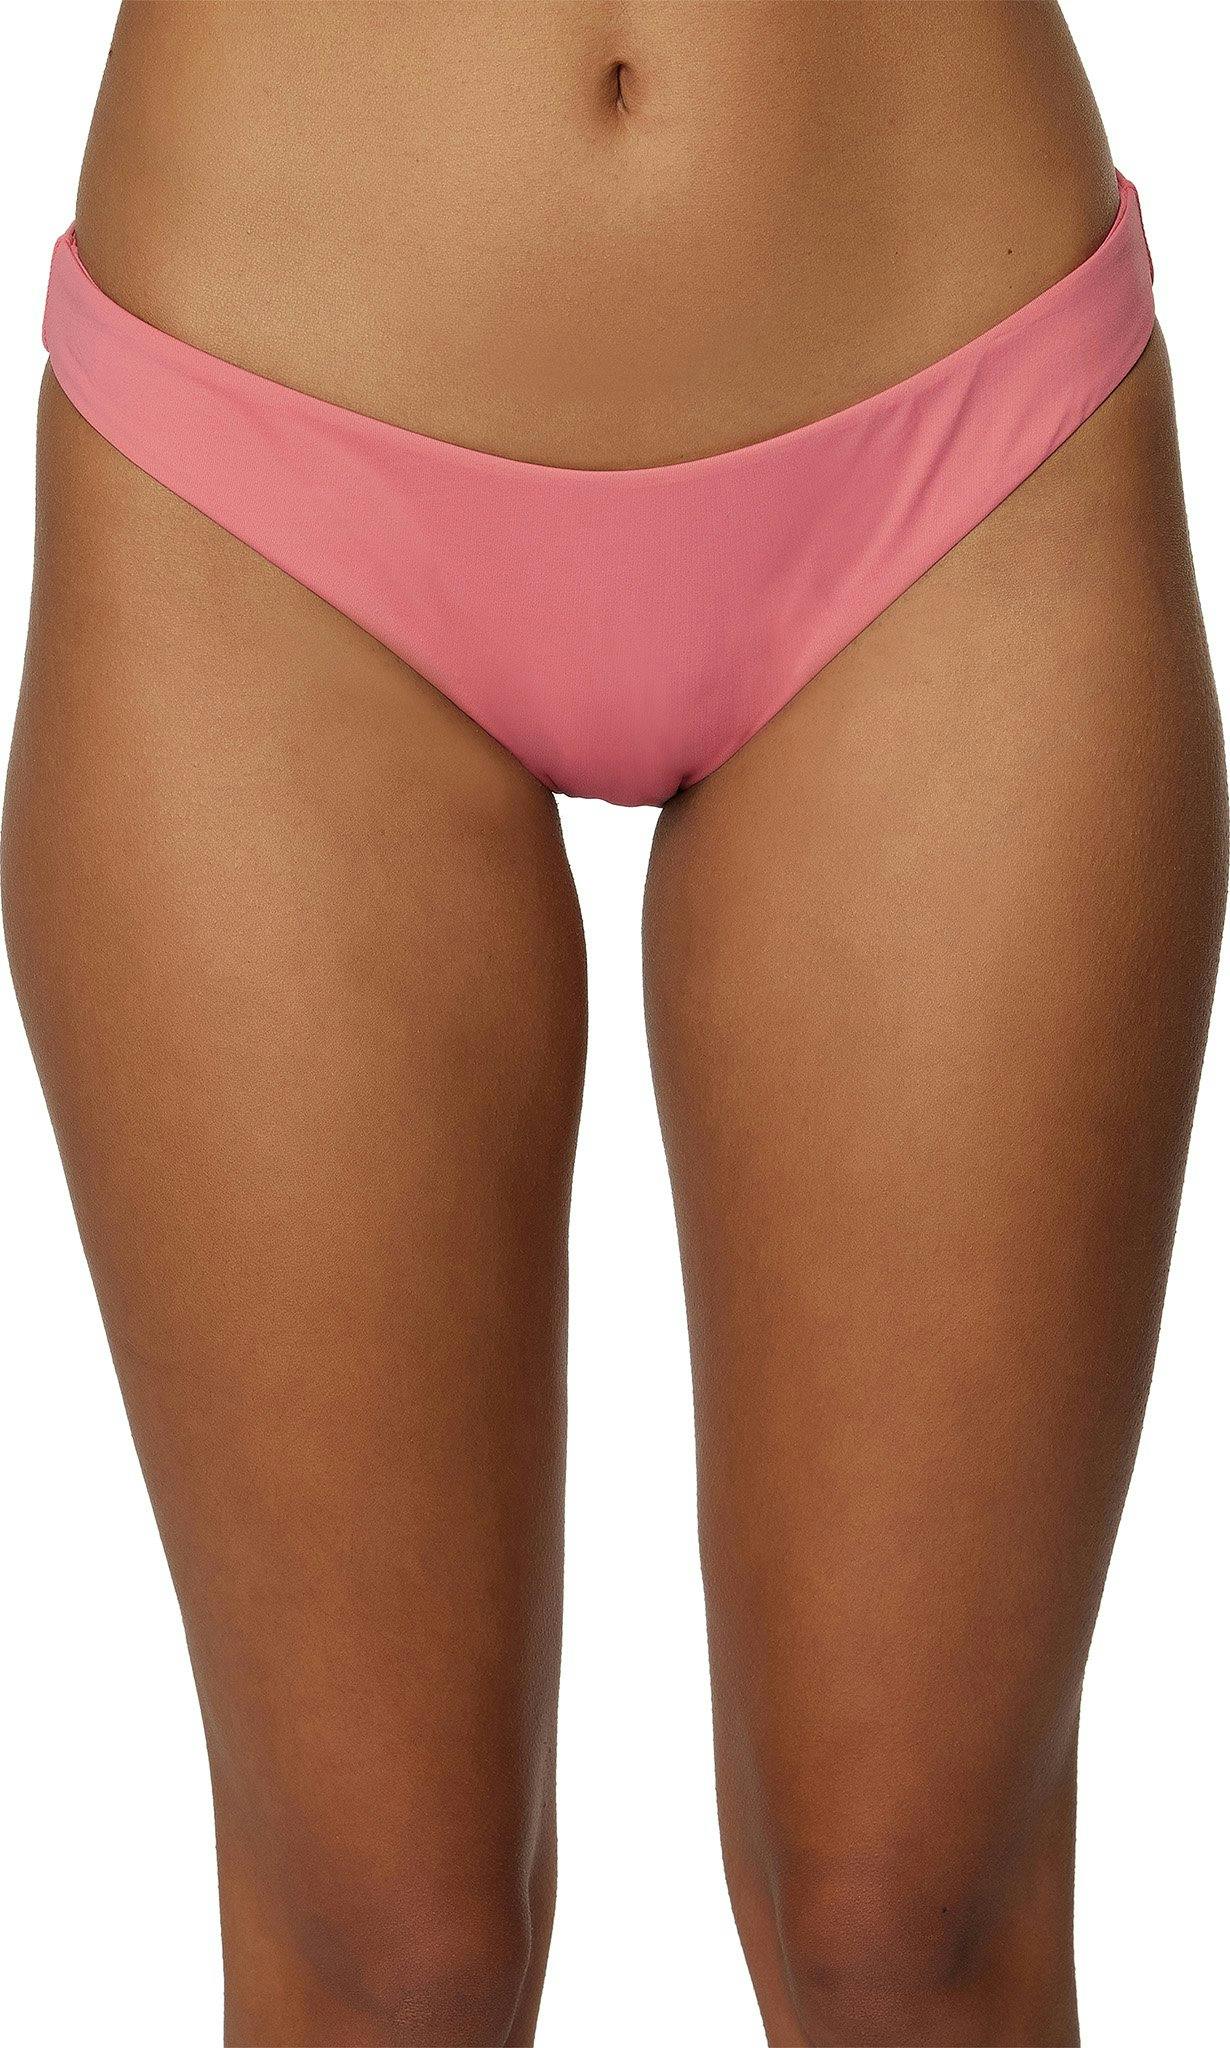 Product image for Saltwater Solids Rockley Swim Bottom - Women's